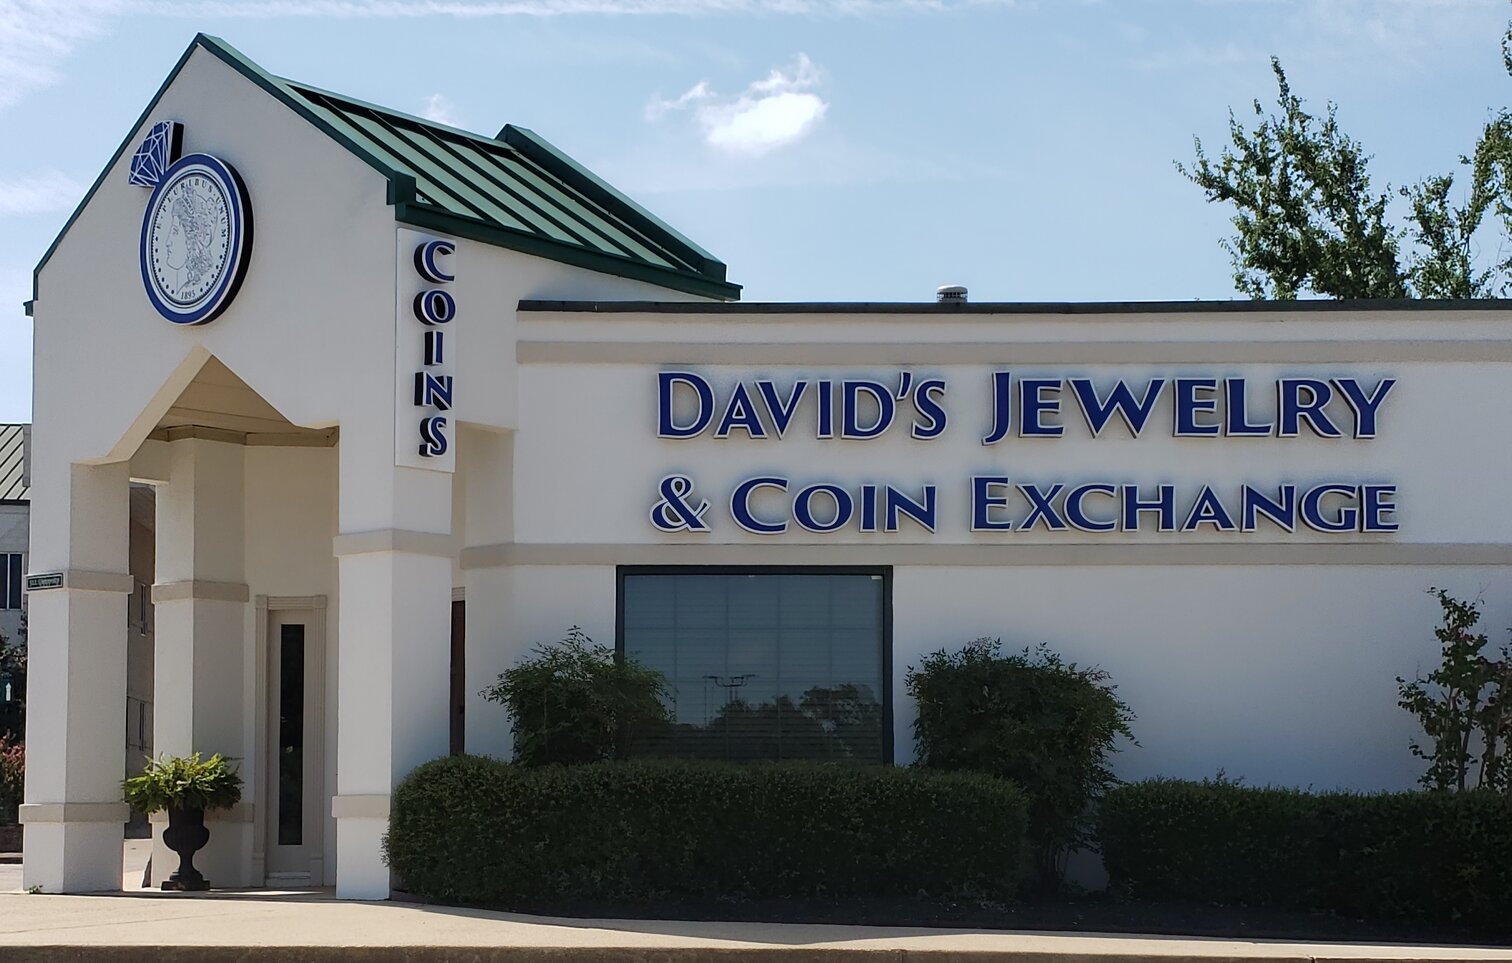 David’s Jewelry and Coin Exchange